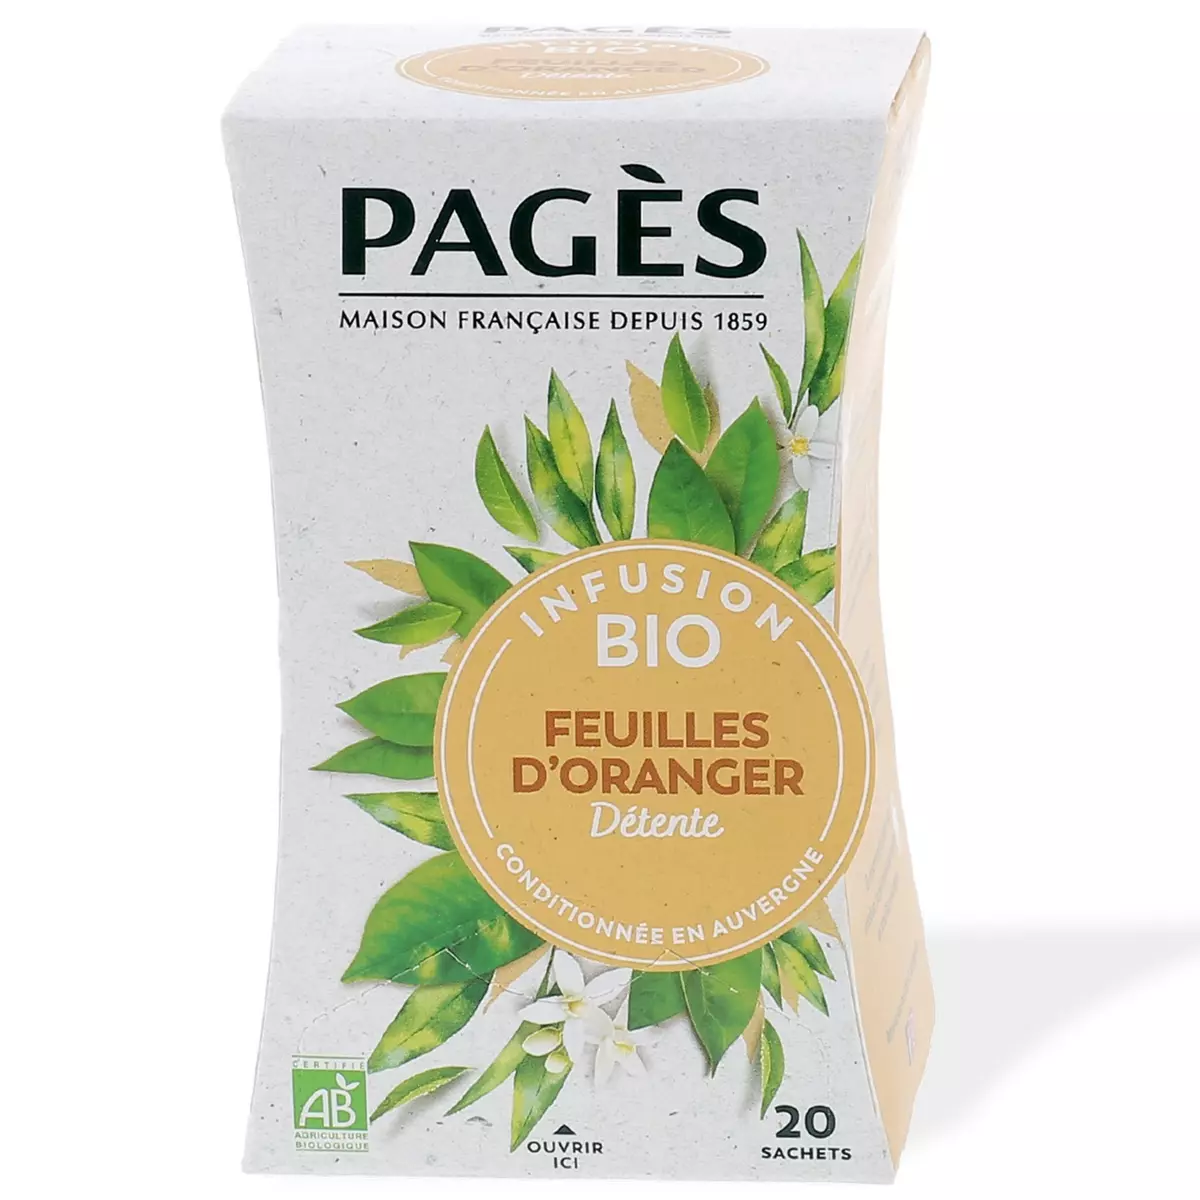 Pages Bio Relax Infusion 20